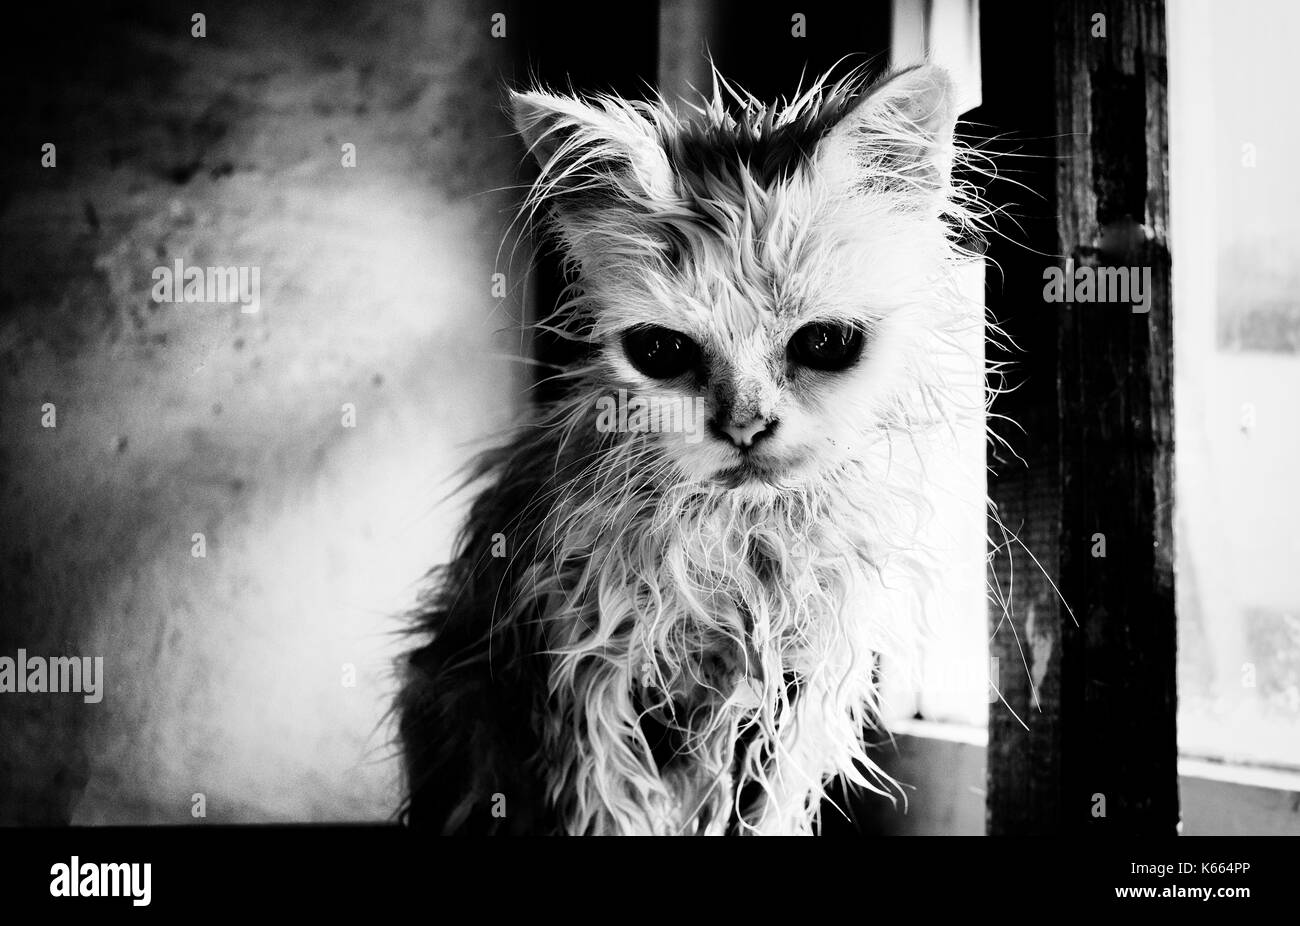 Wet cat Black and White Stock Photos & Images - Alamy